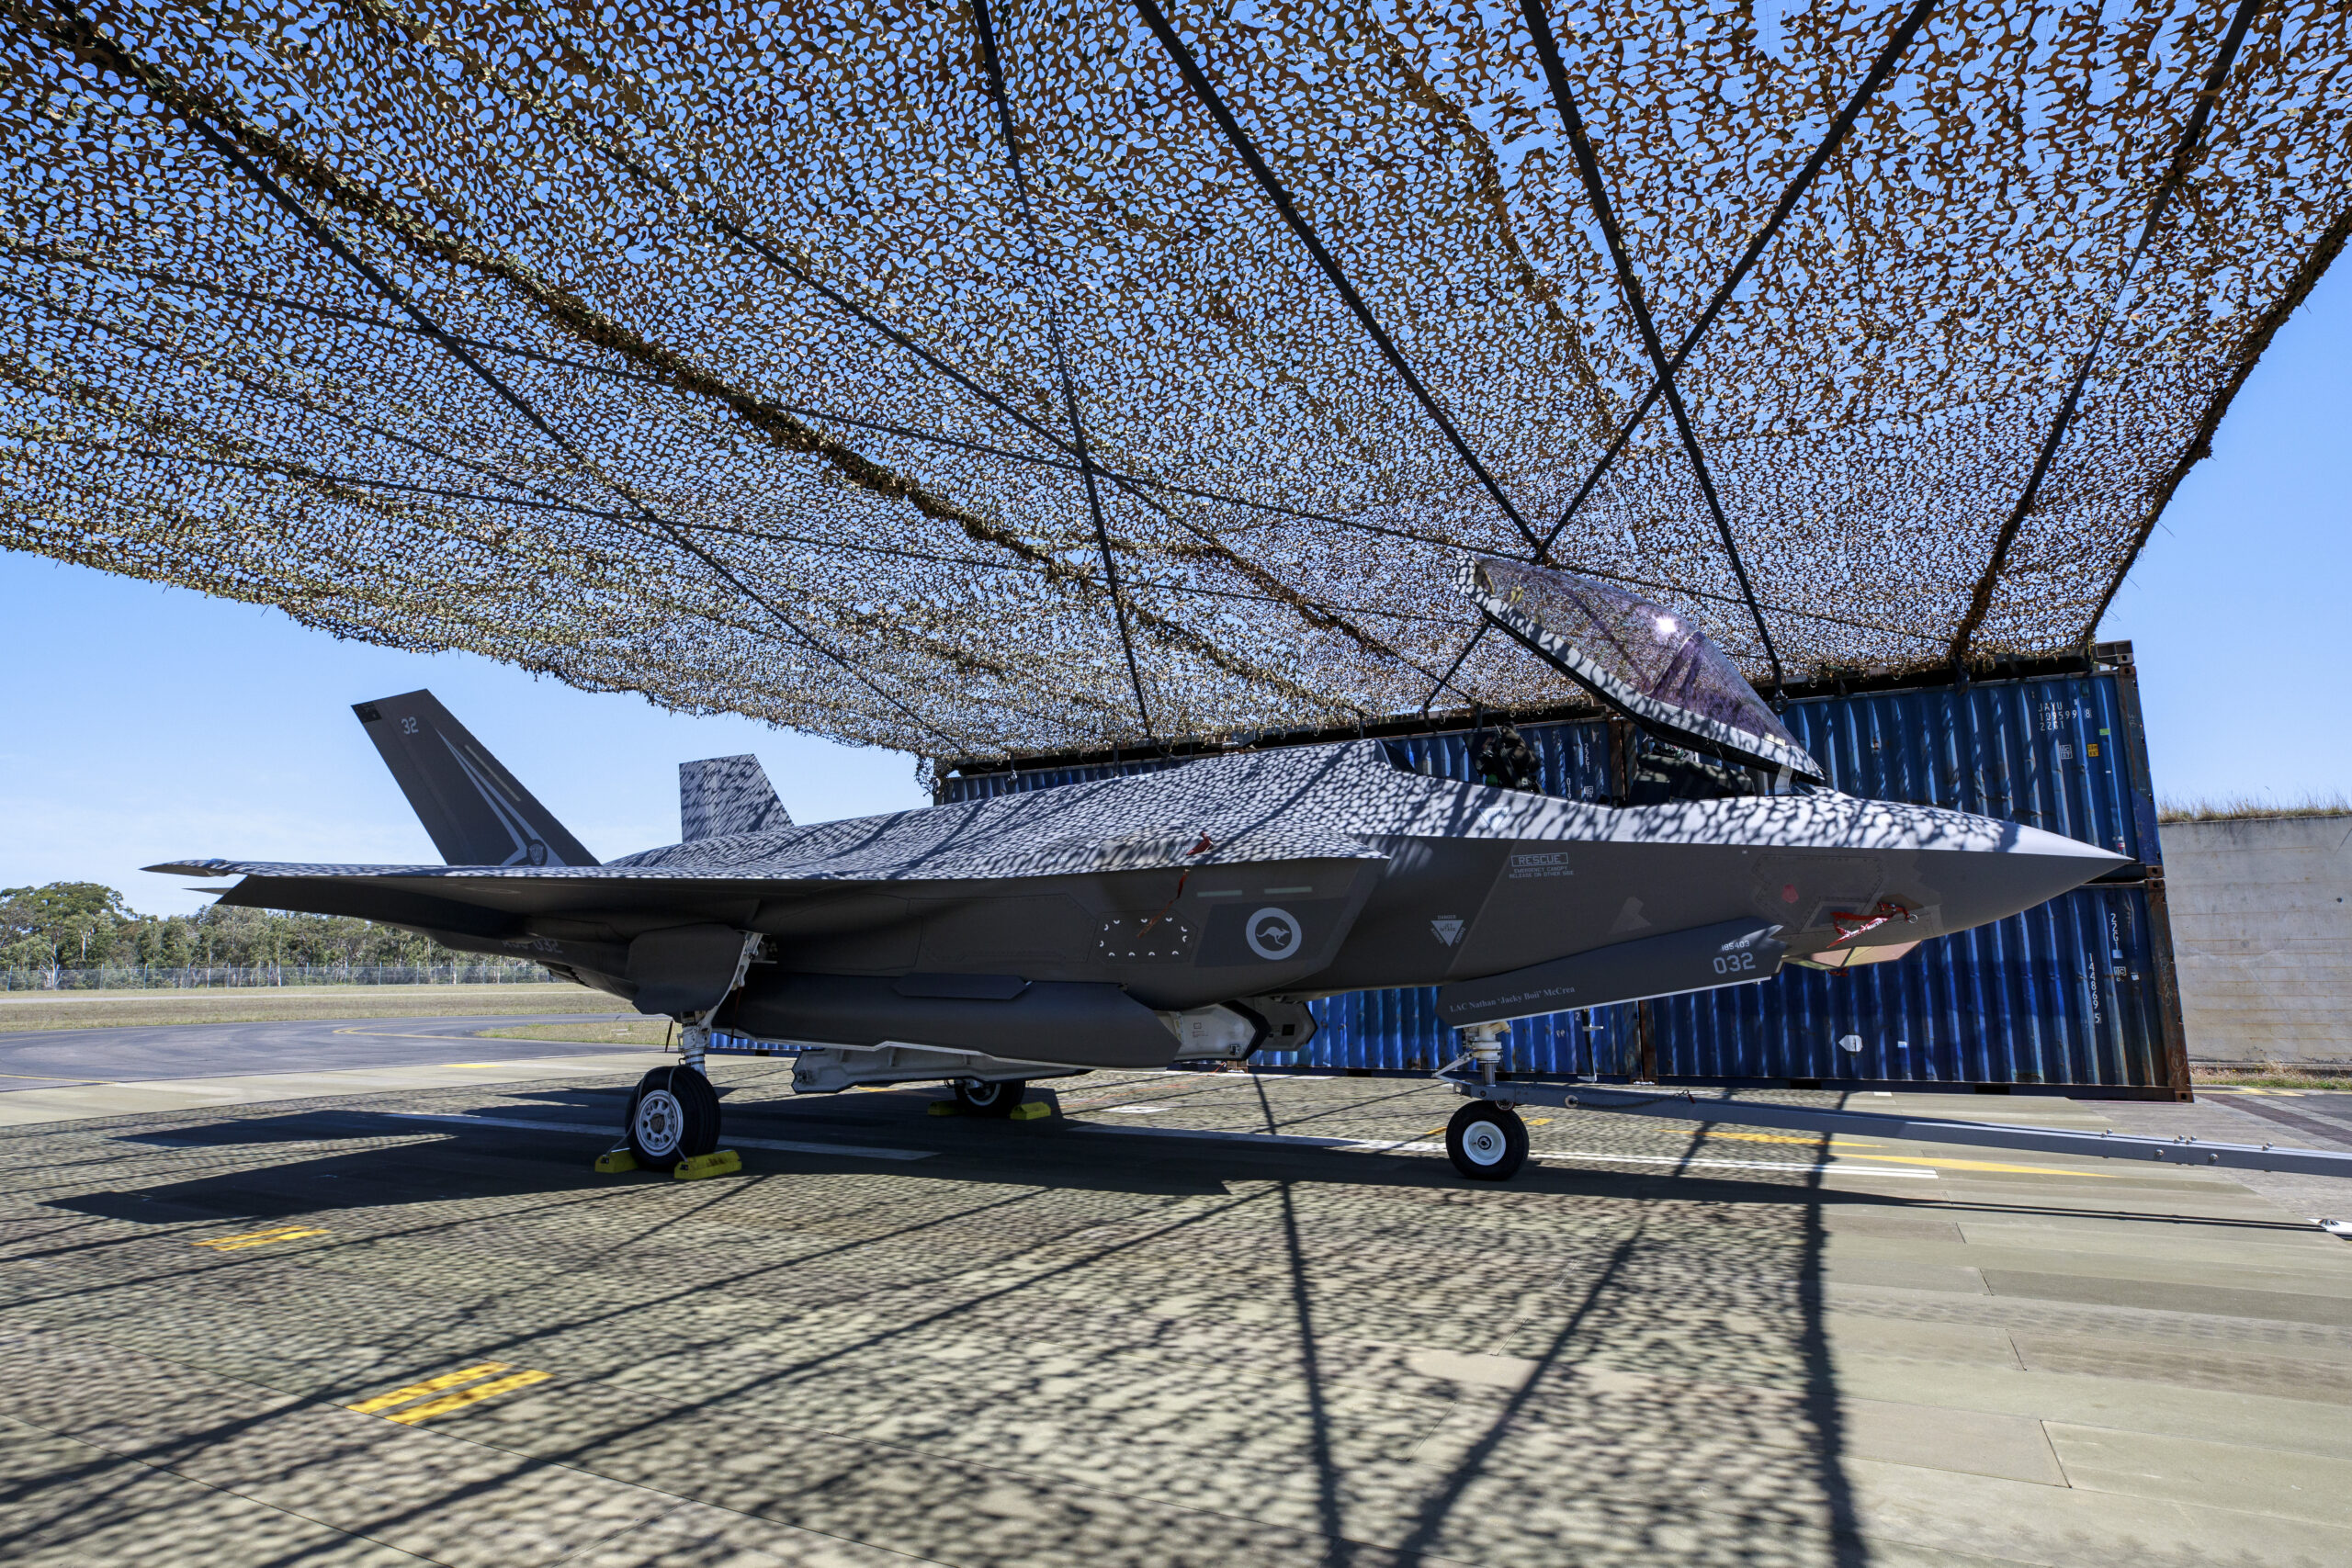 An F-35A Lightning II aircraft under a temporary aircraft revetment being trialled at RAAF Base Williamtown, New South Wales. *** Local Caption *** In October 2023, the Air Combat Group initiated and executed a trial to construct a temporary aircraft revetment at RAAF Base Williamtown. The trial demonstrated alternative passive defence methods and materials. Aircraft revetments are open-air structures intended to shield parked aircraft from discovery, blast and fragmentation damage. Personnel from No.65 Air Base Recovery Squadron were tasked with constructing the revetment. The trial aimed to inform Air Force of future dispersed aircraft revetment solutions in support of agile operation concepts.